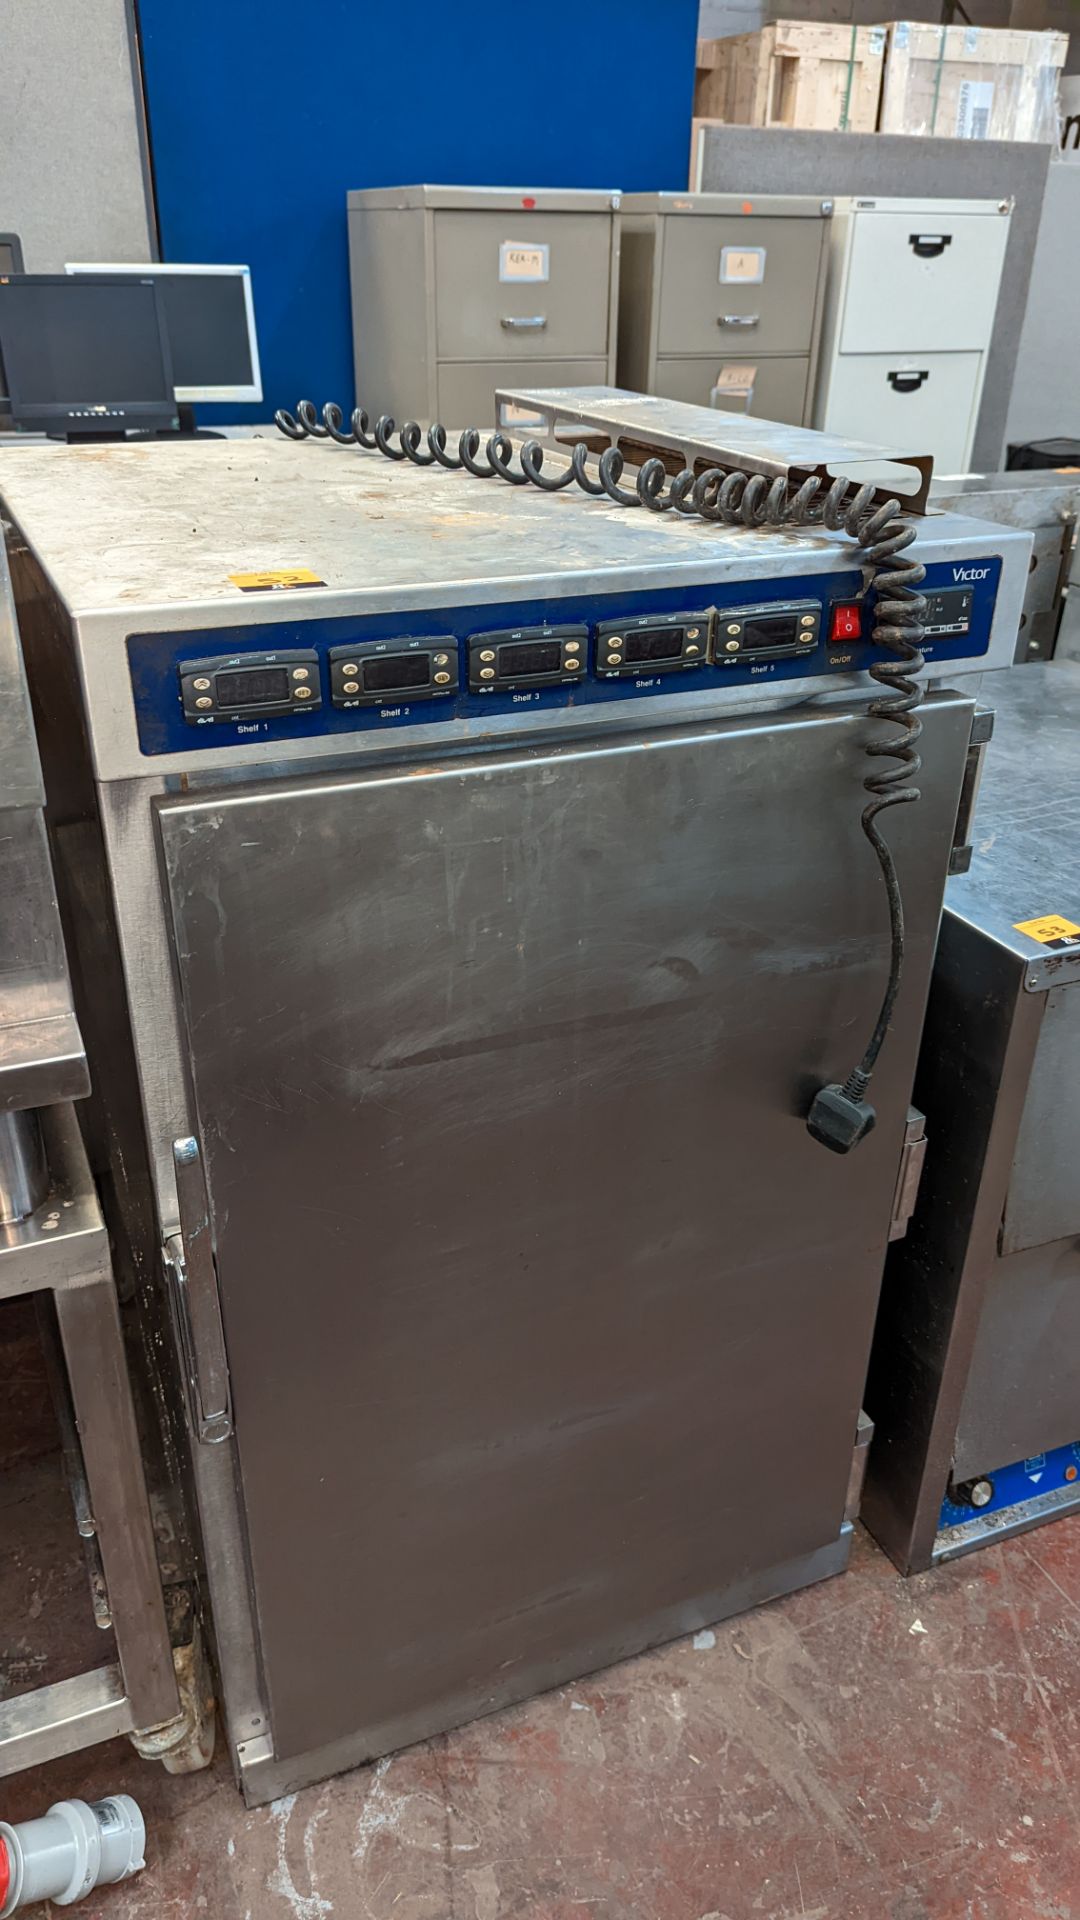 Victor stainless steel warming cupboard